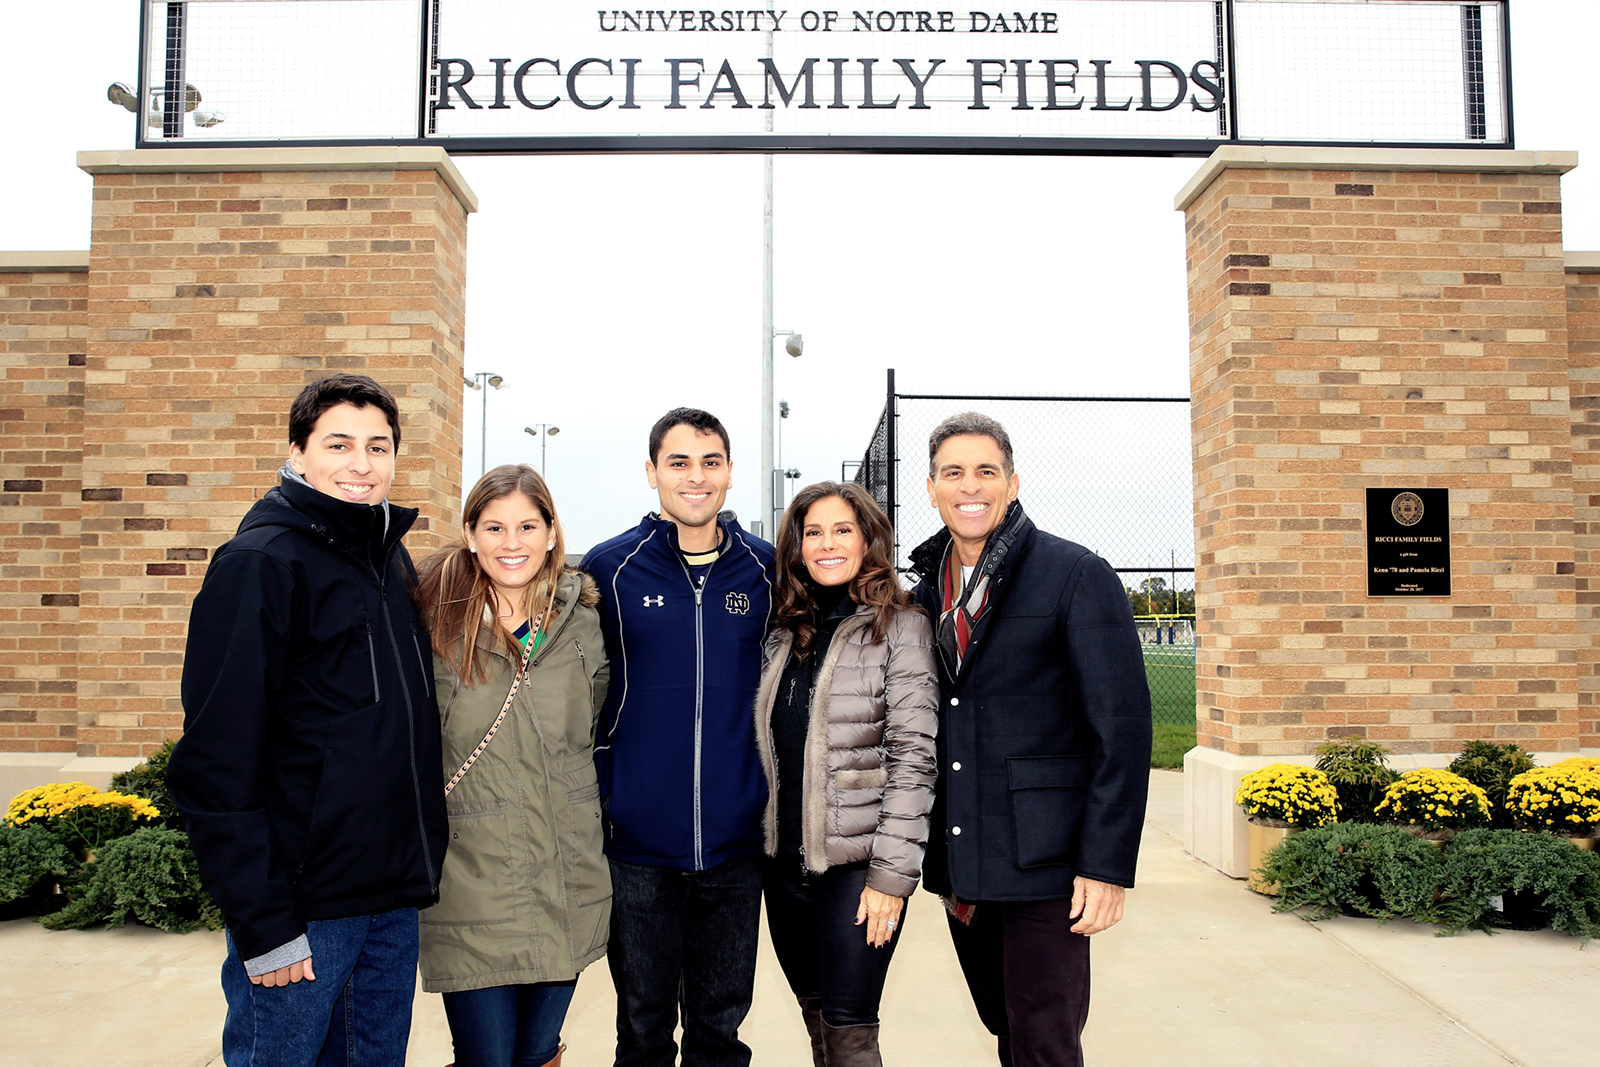 Ricci Family at Notre Dame